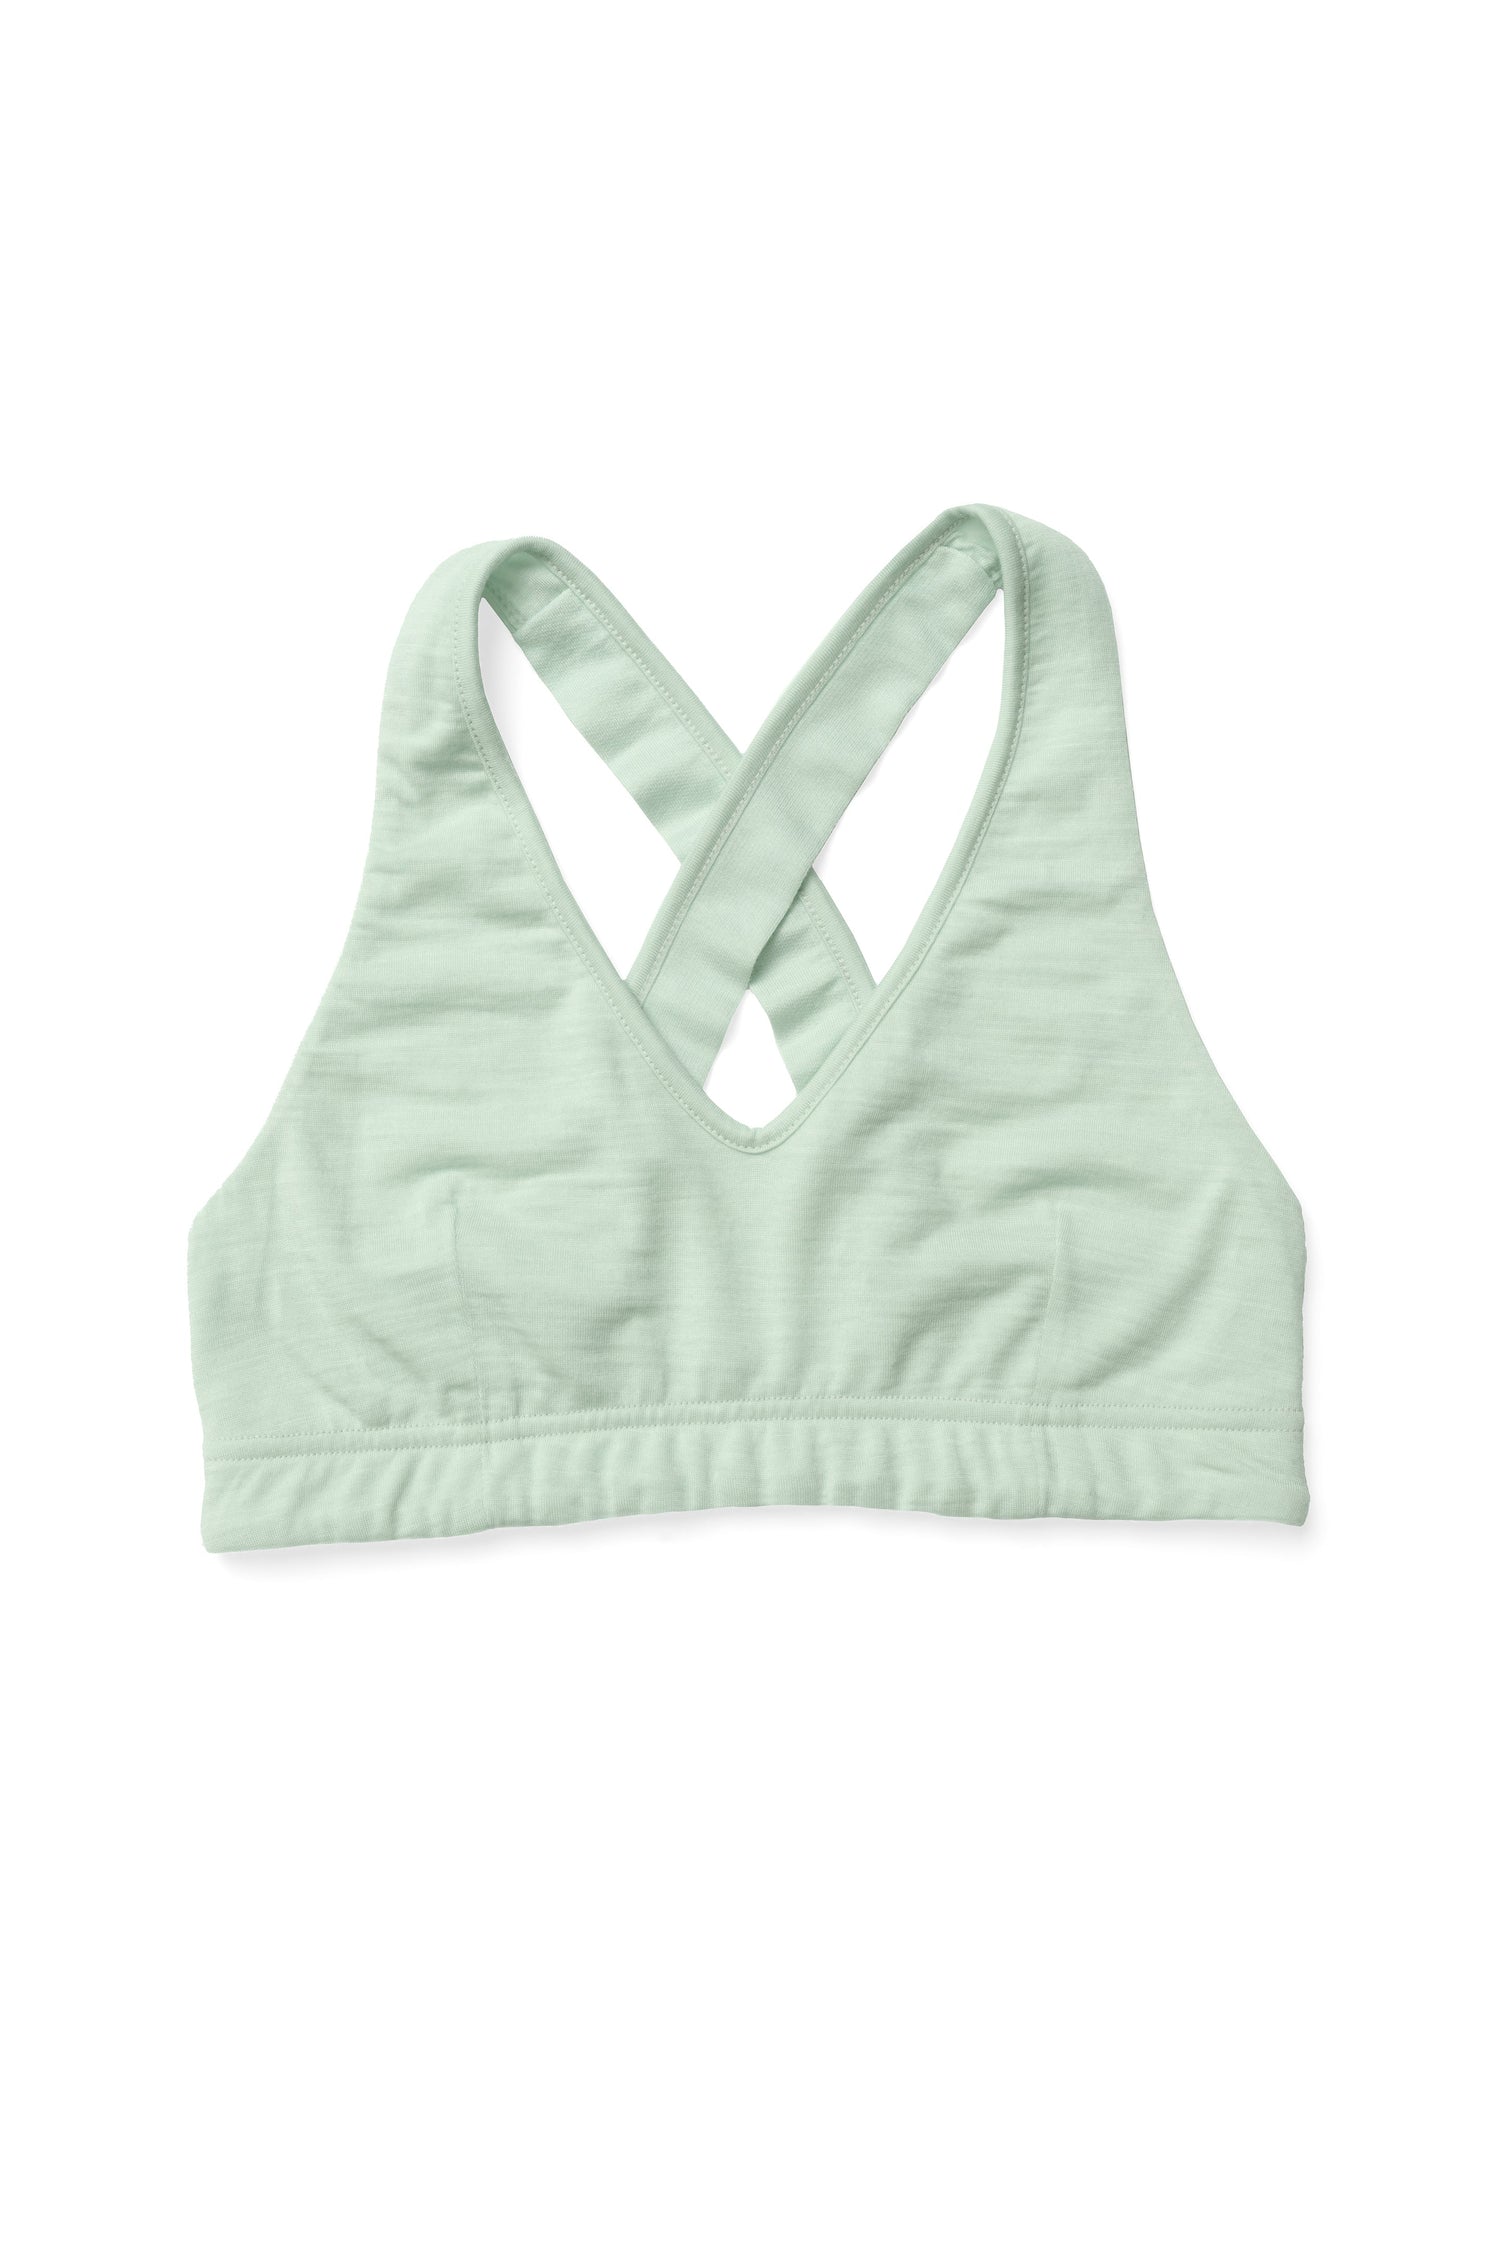 Sports Bra and Underwear Market: Strong Sales Outlook Ahead